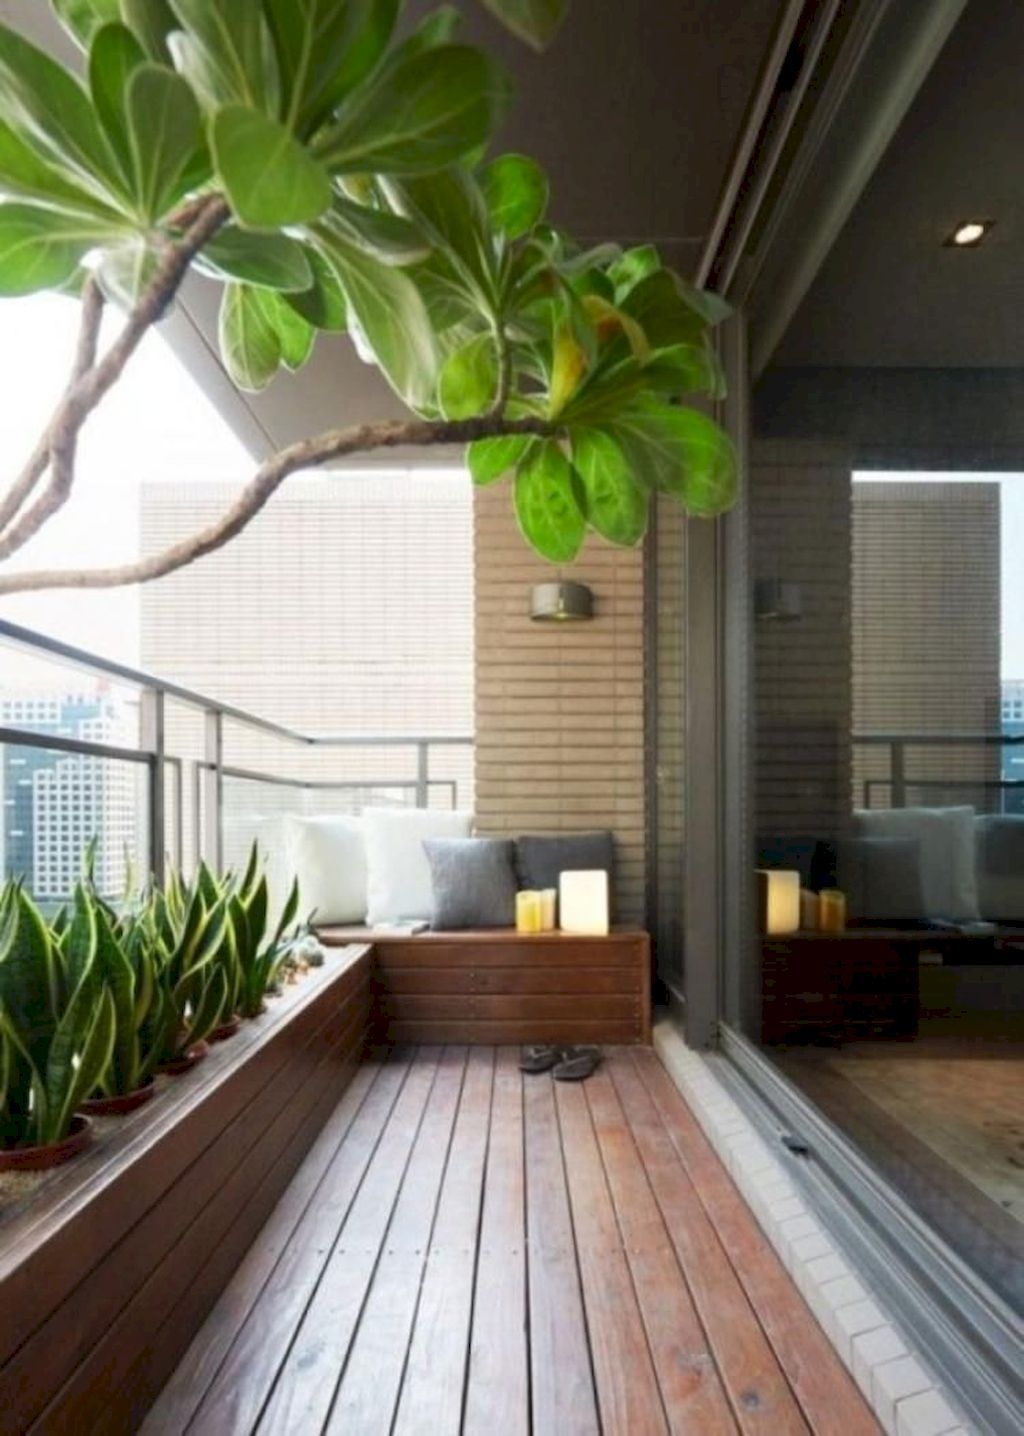 Superb Apartment Balcony Decorating Ideas To Try28